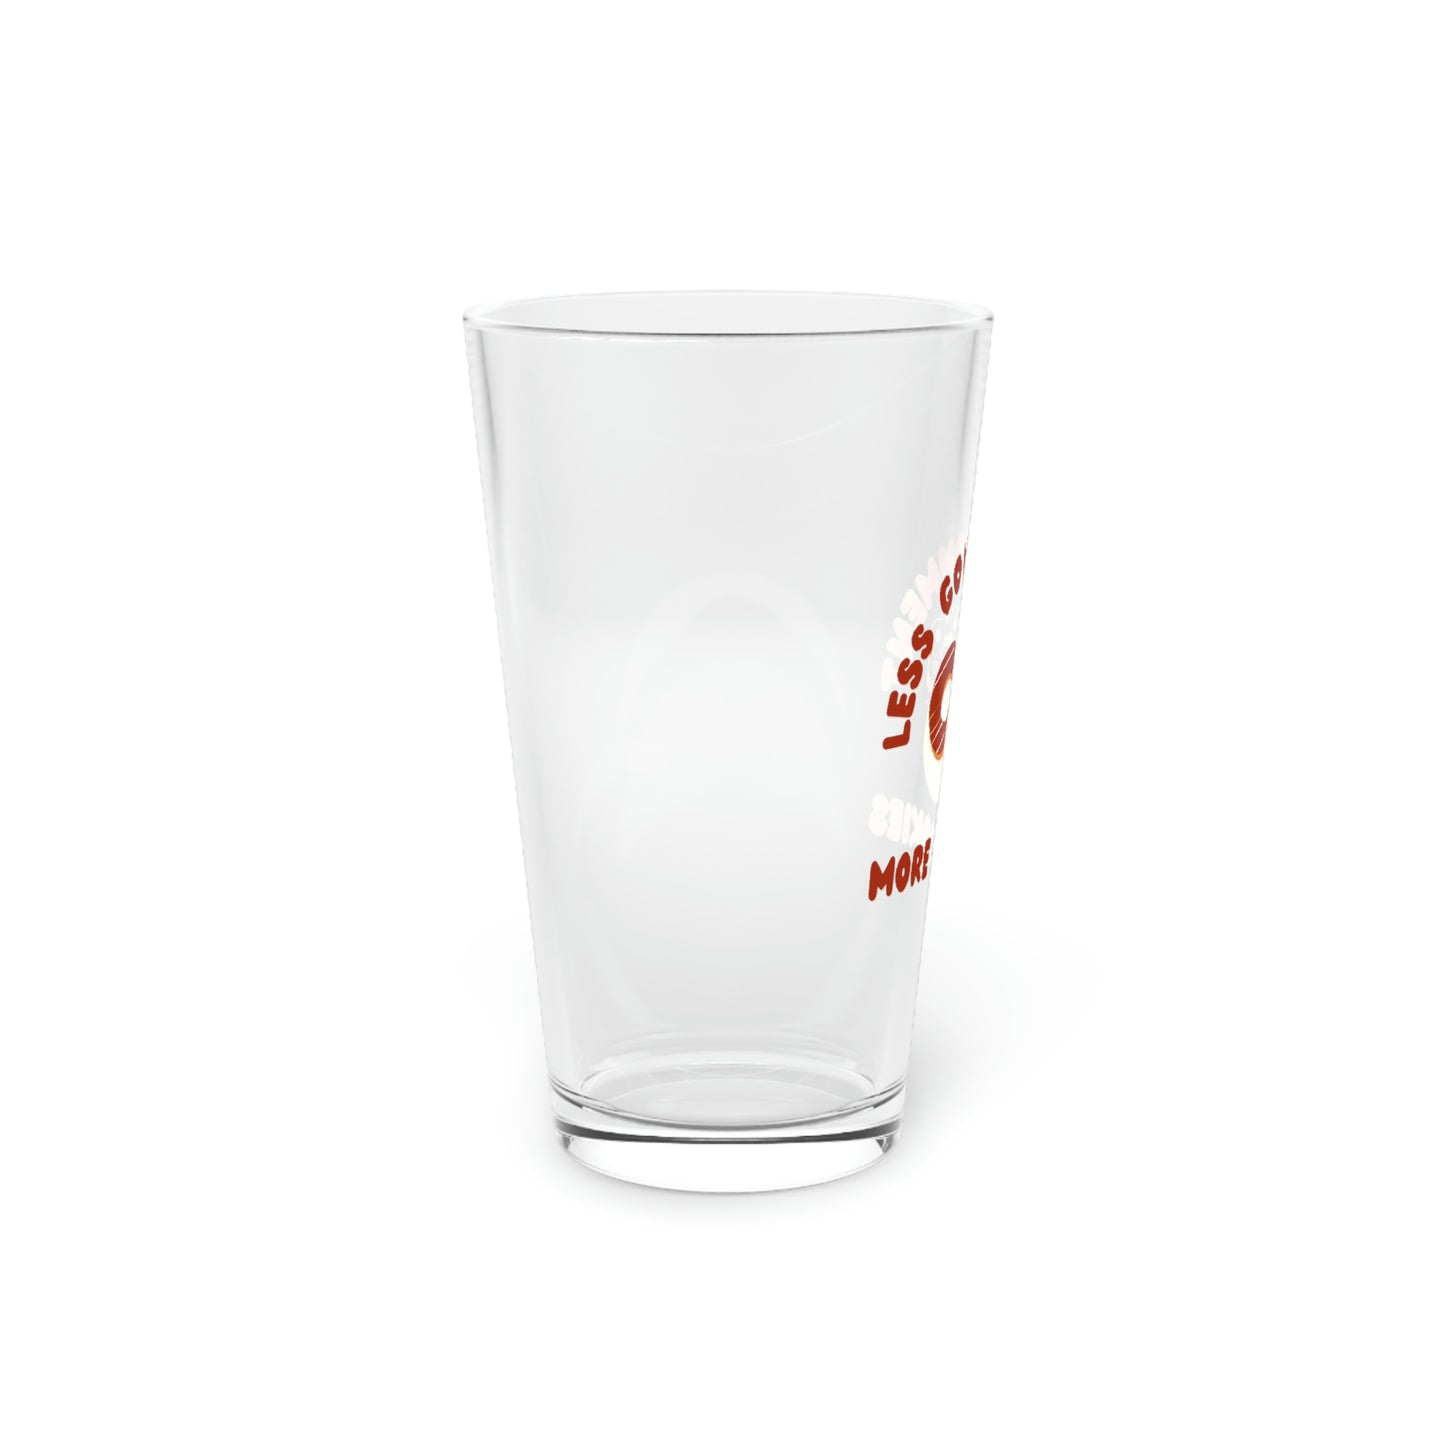 "Less Government" Pint Glass for Santa